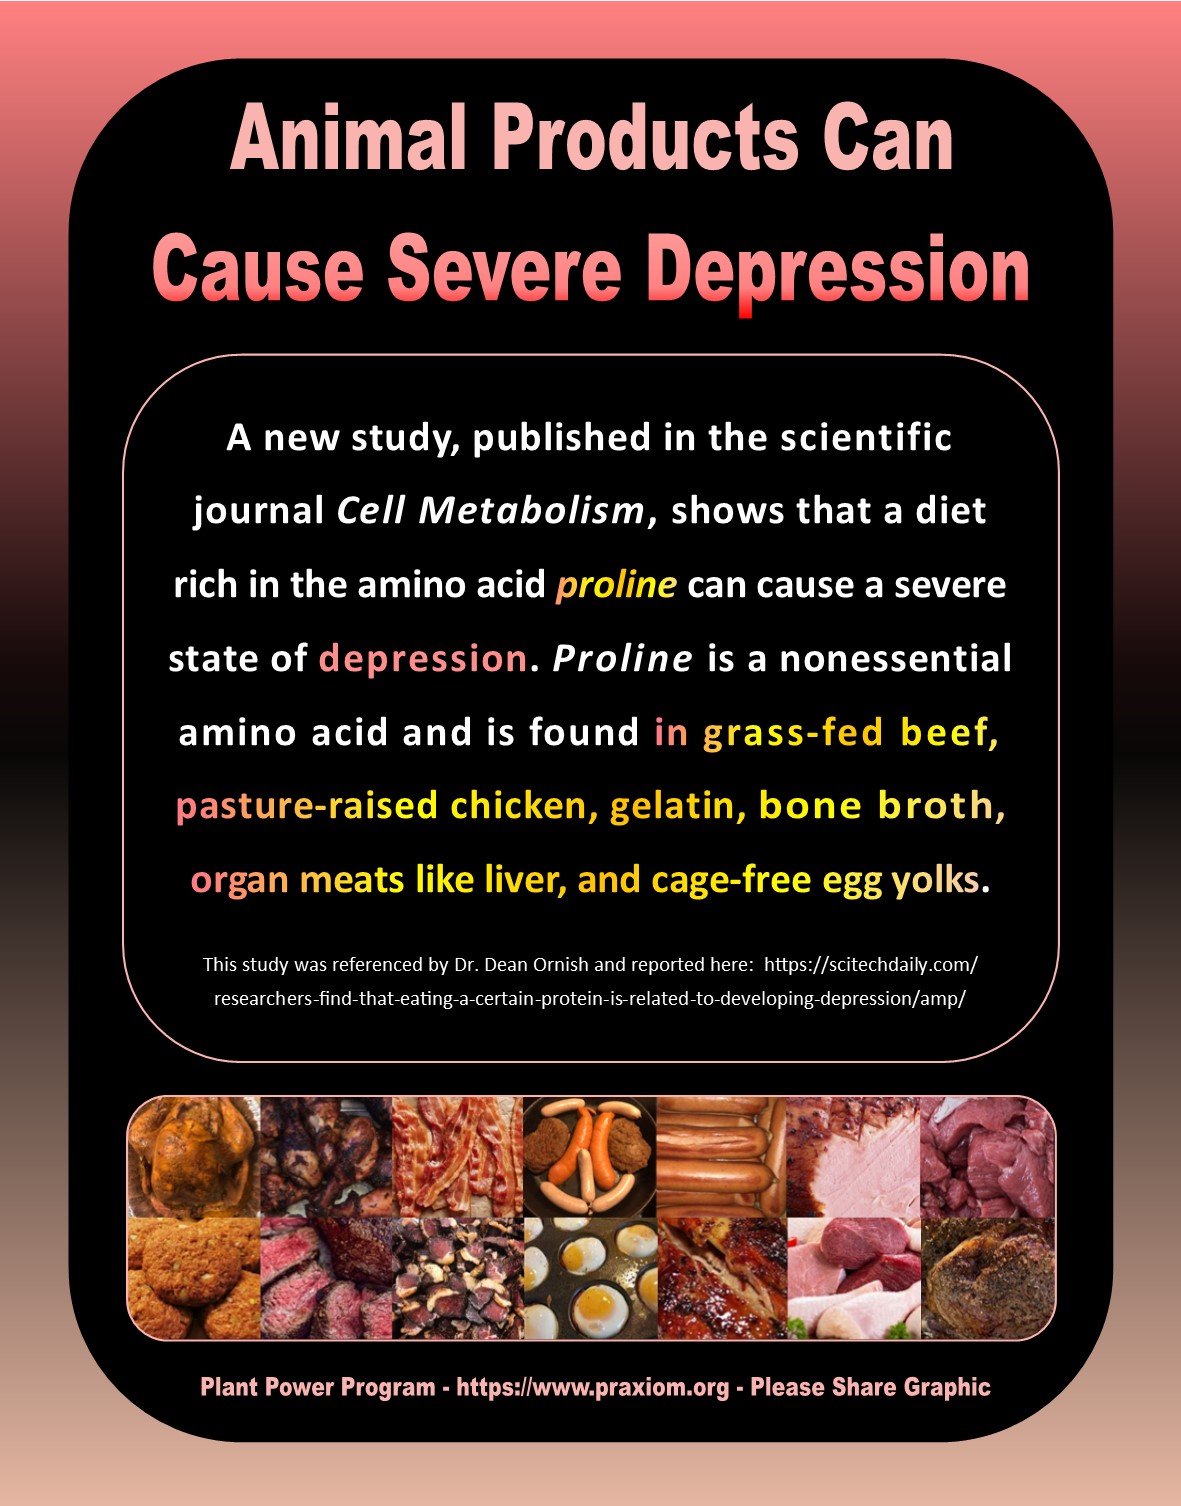 Animal Products Can Cause Severe Depression